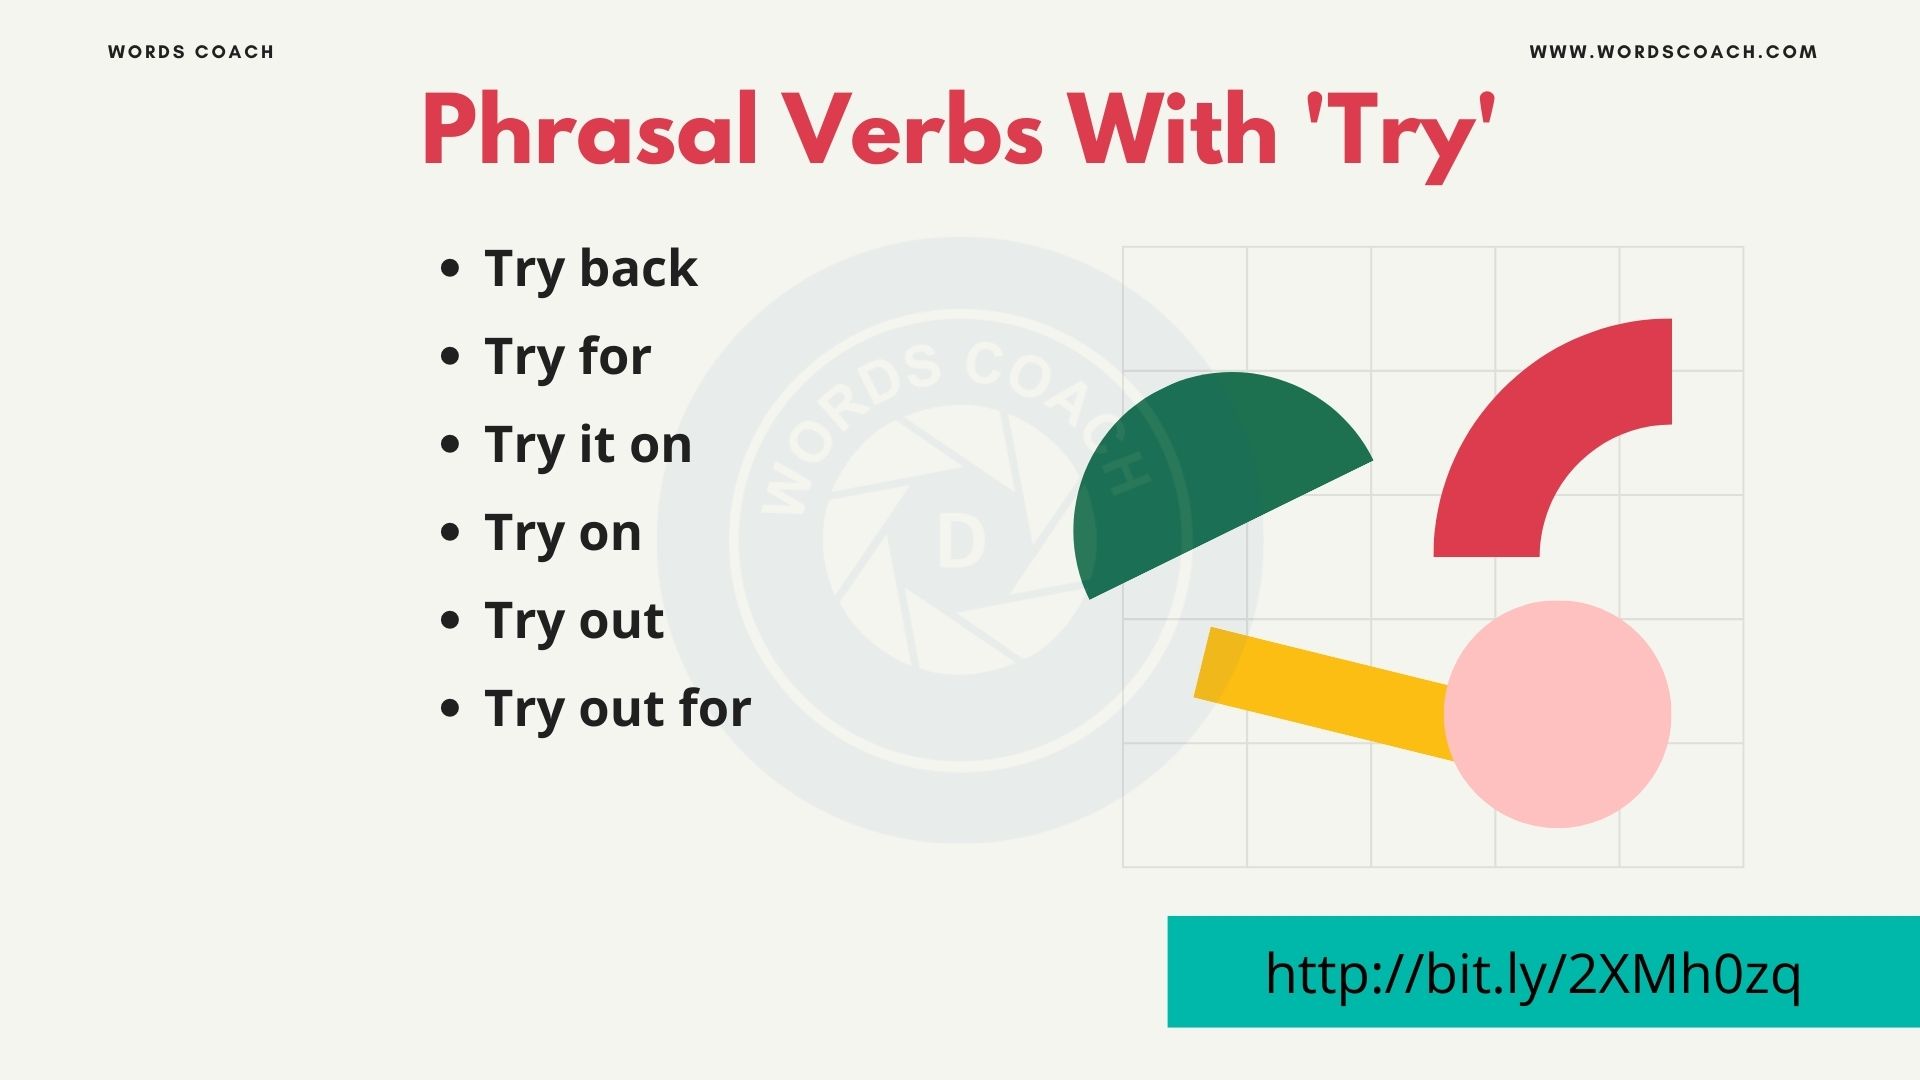 Phrasal Verbs With 'Try' - wordscoach.com